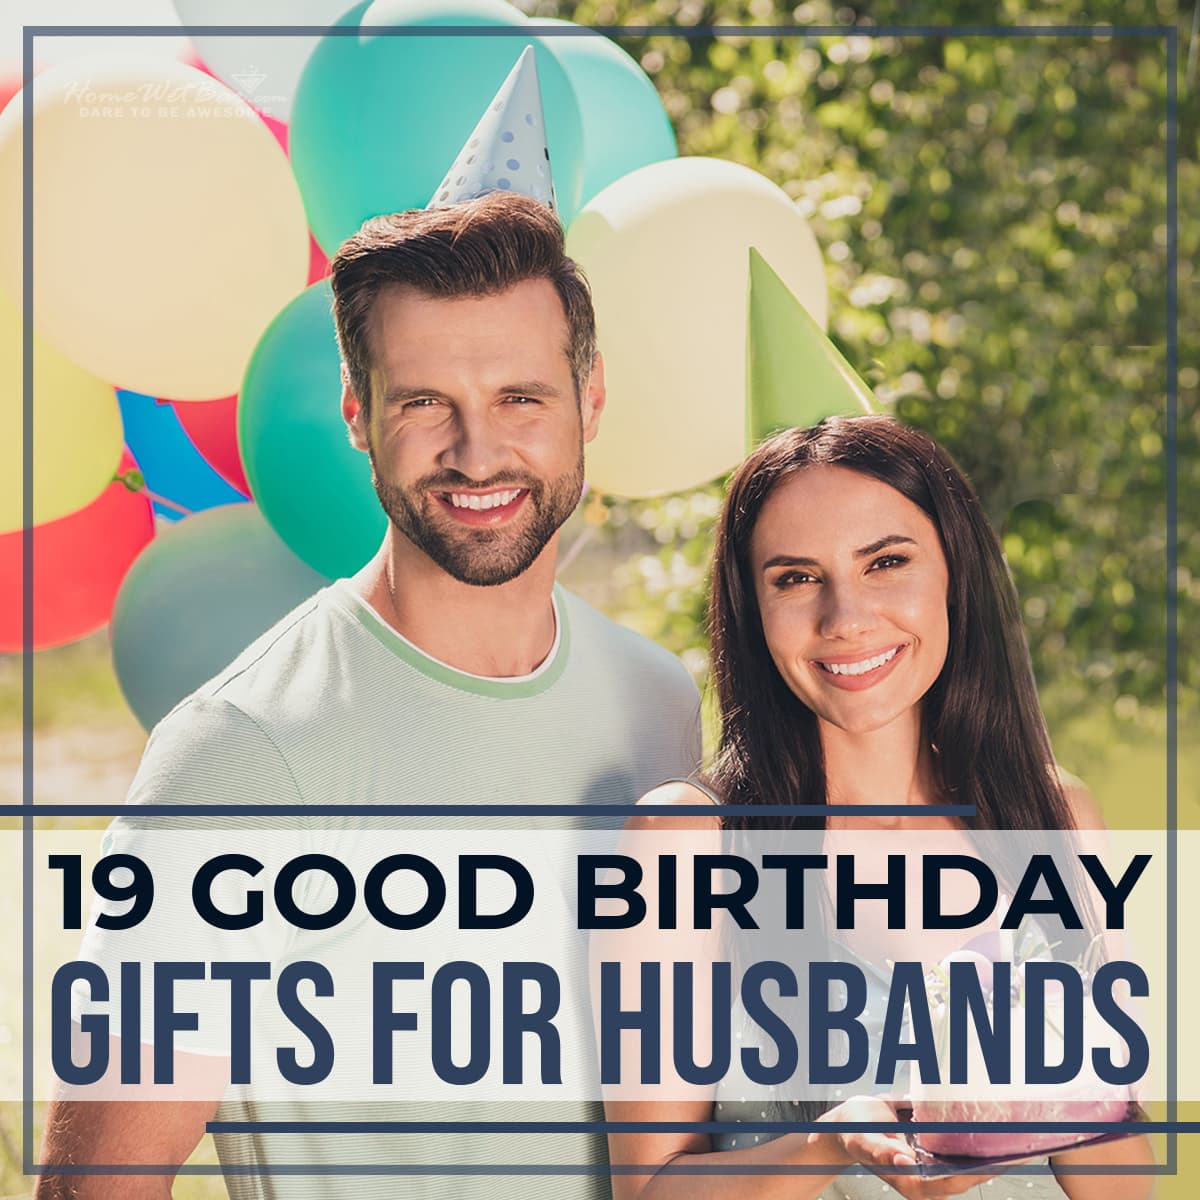 19 Good Birthday Gifts for Husbands